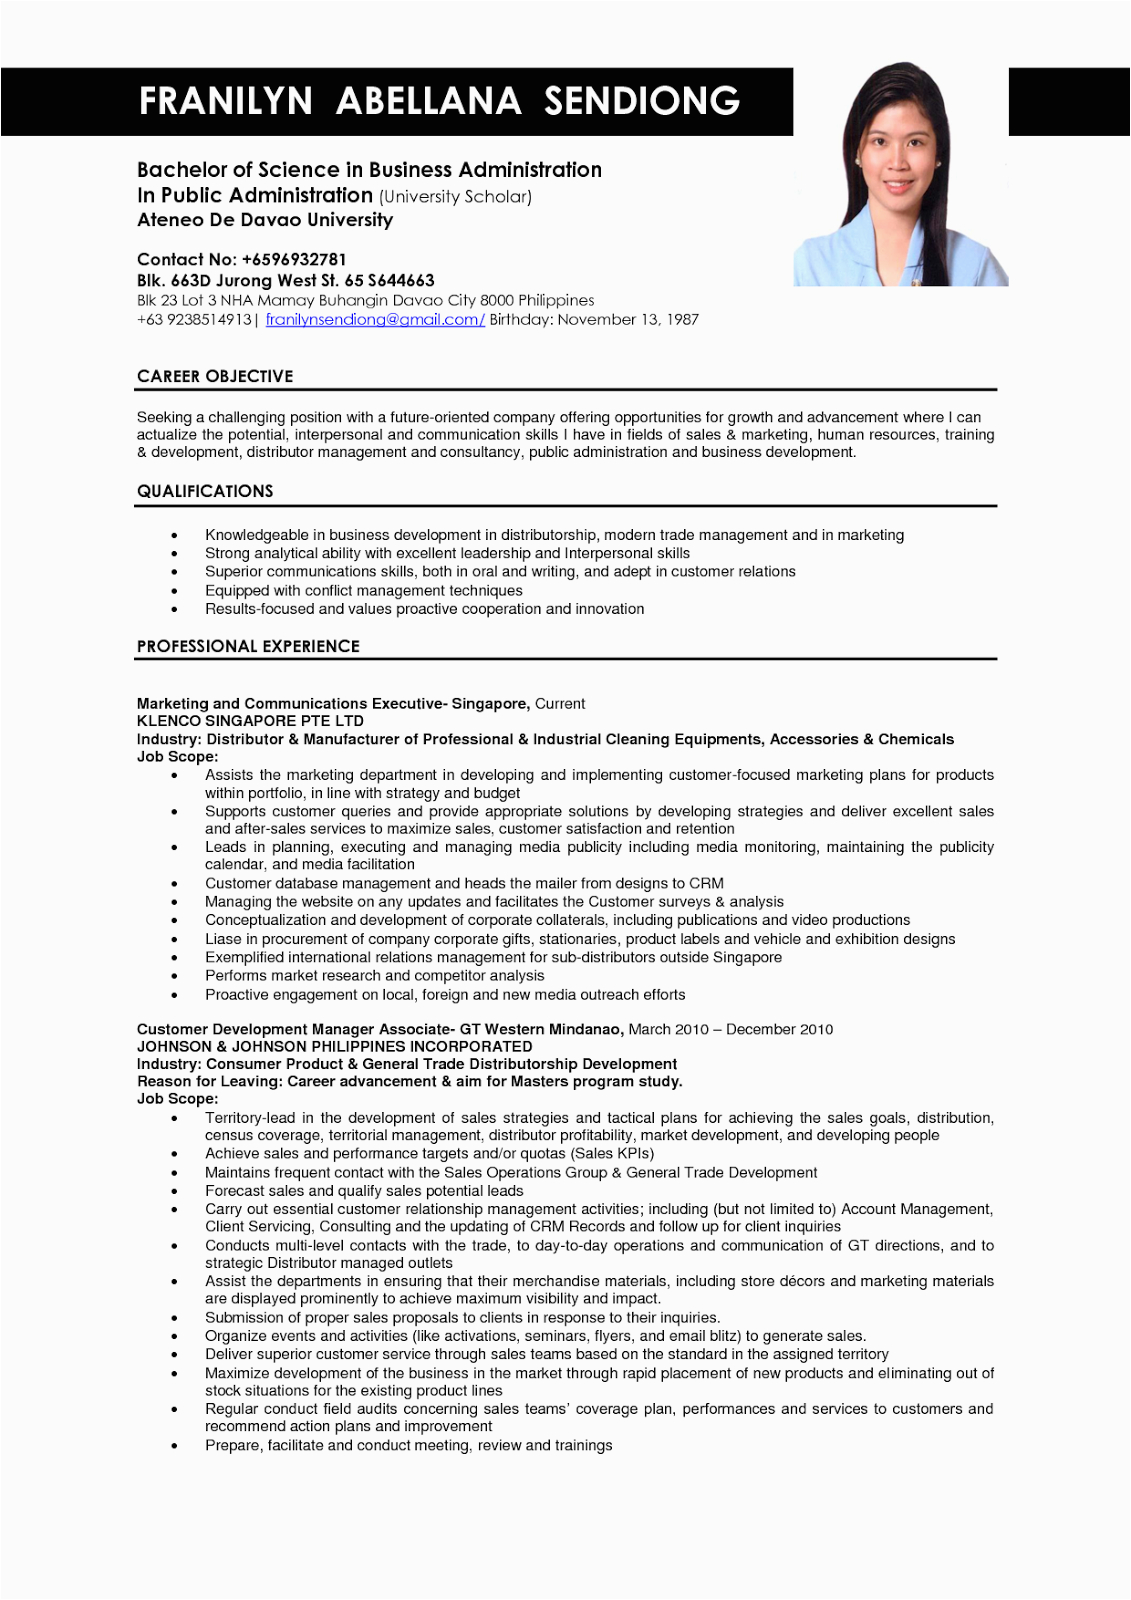 Resume Sample for Business Administration Graduate Business Administration Resume Samples